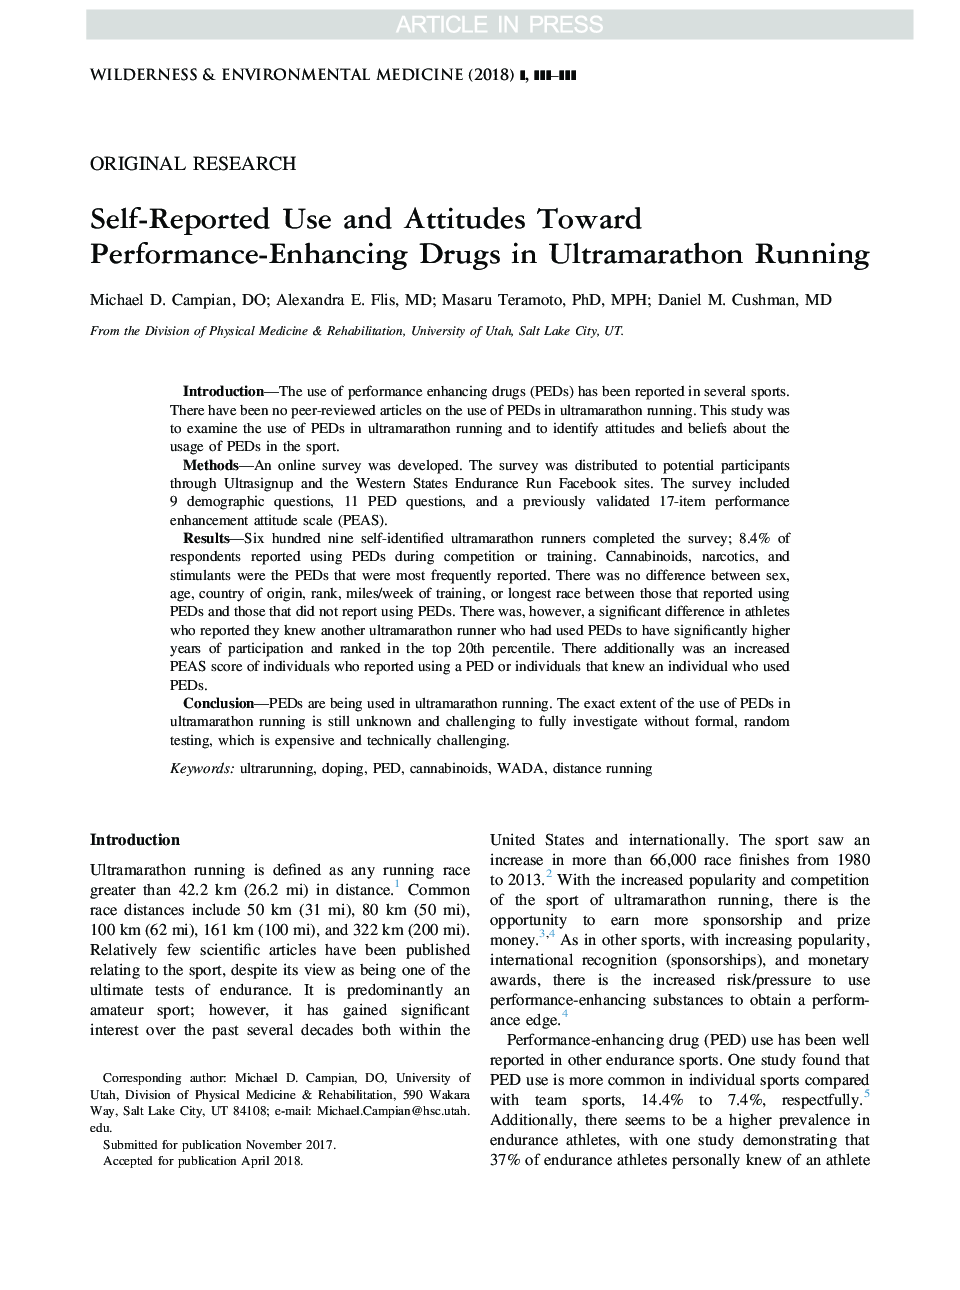 Self-Reported Use and Attitudes Toward Performance-Enhancing Drugs in Ultramarathon Running